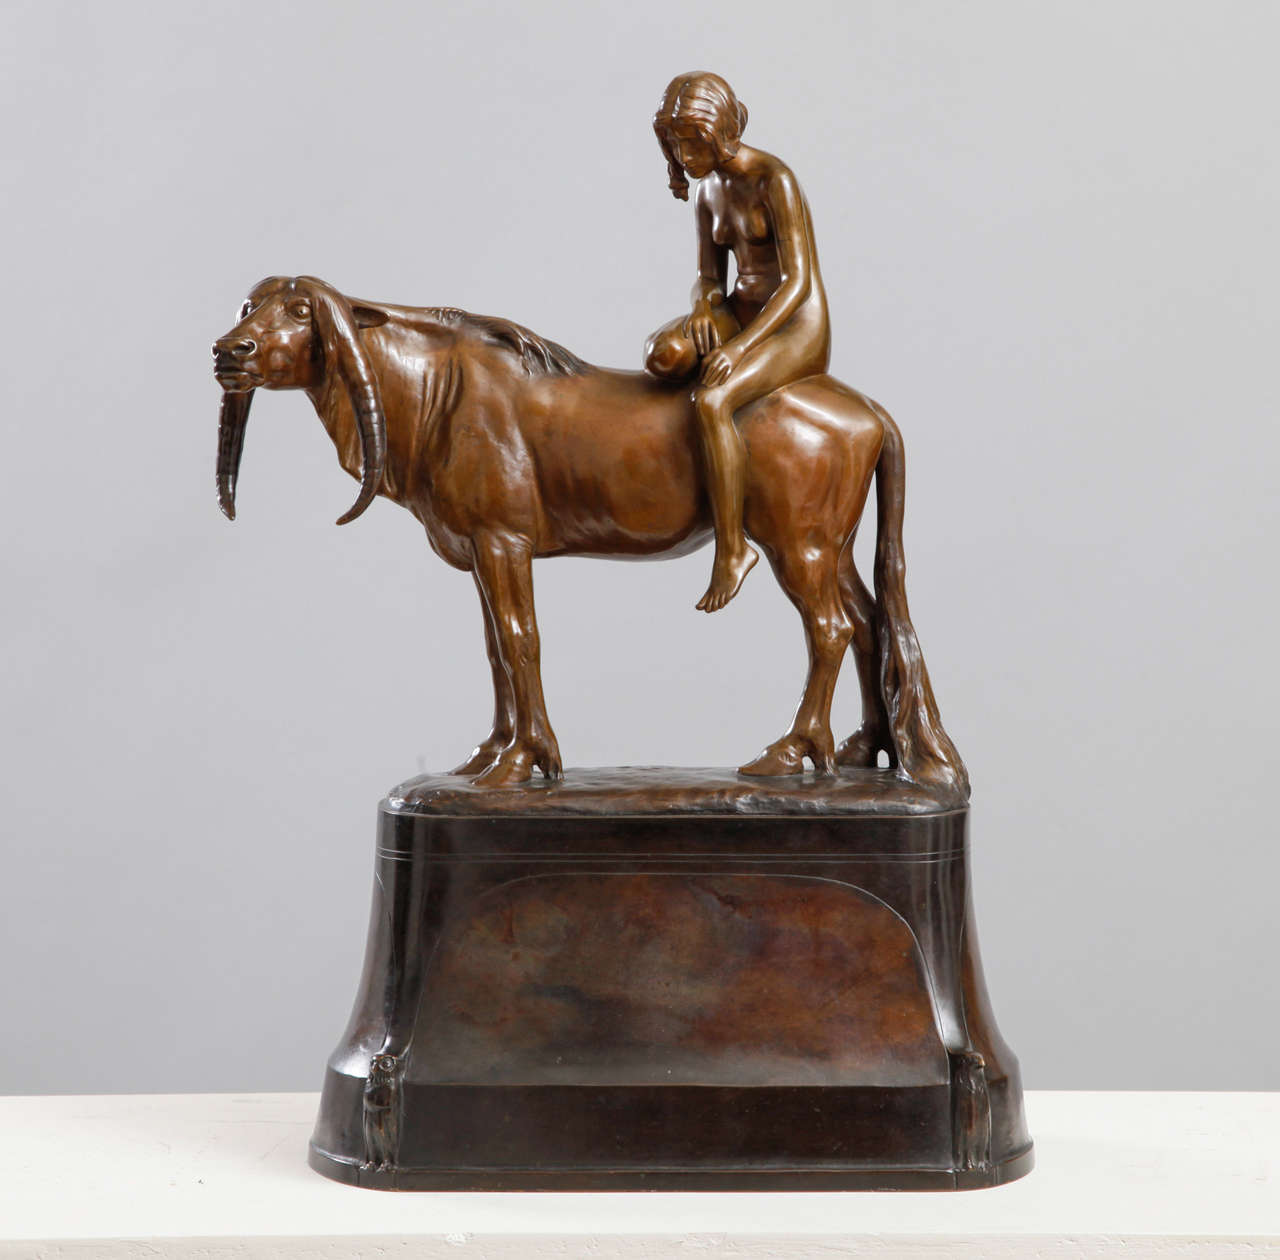 Sculptor Hermann Haase-Ilsenburg started in 1903 to exhibit genre sculptures at the 'Grosse Berliner Kunstausstellung.' He also took part in other exhibitions such as the 'Glaspalast-Ausstellung in Munich' in 1912 and 1913; and in 1913 in